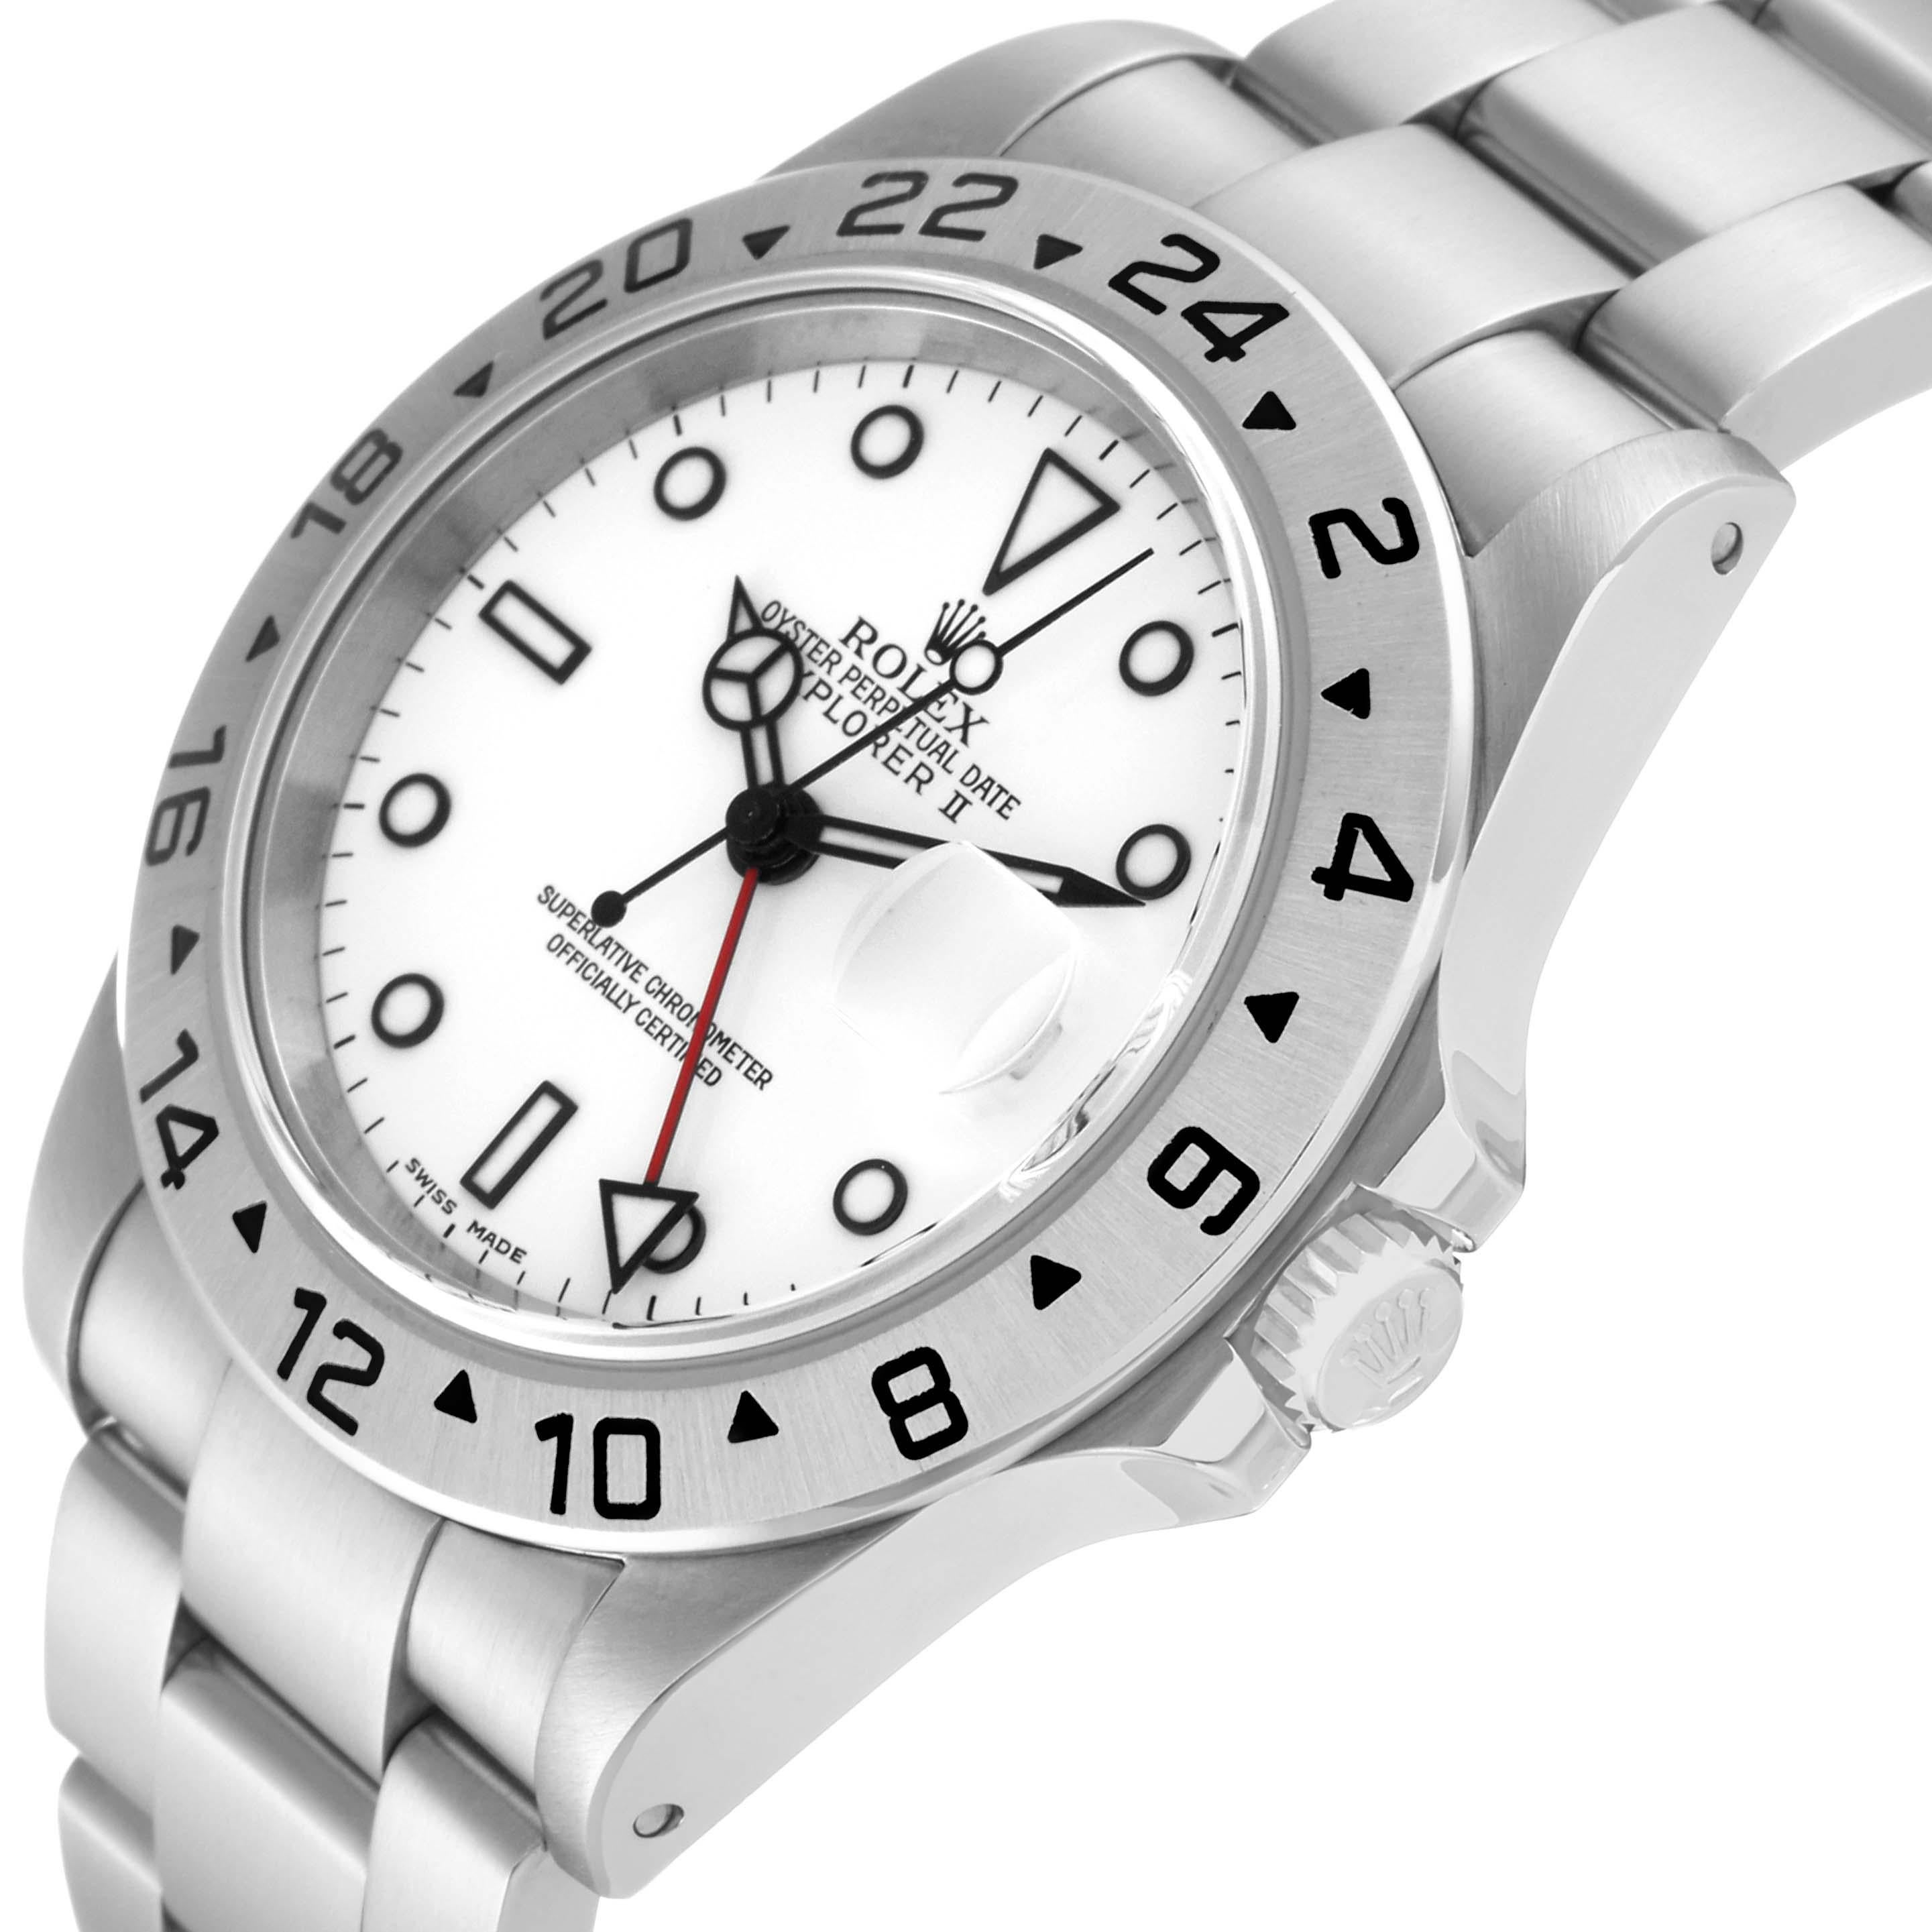 Rolex Explorer II 40mm Polar White Dial Steel Mens Watch 16570 Box Papers 1